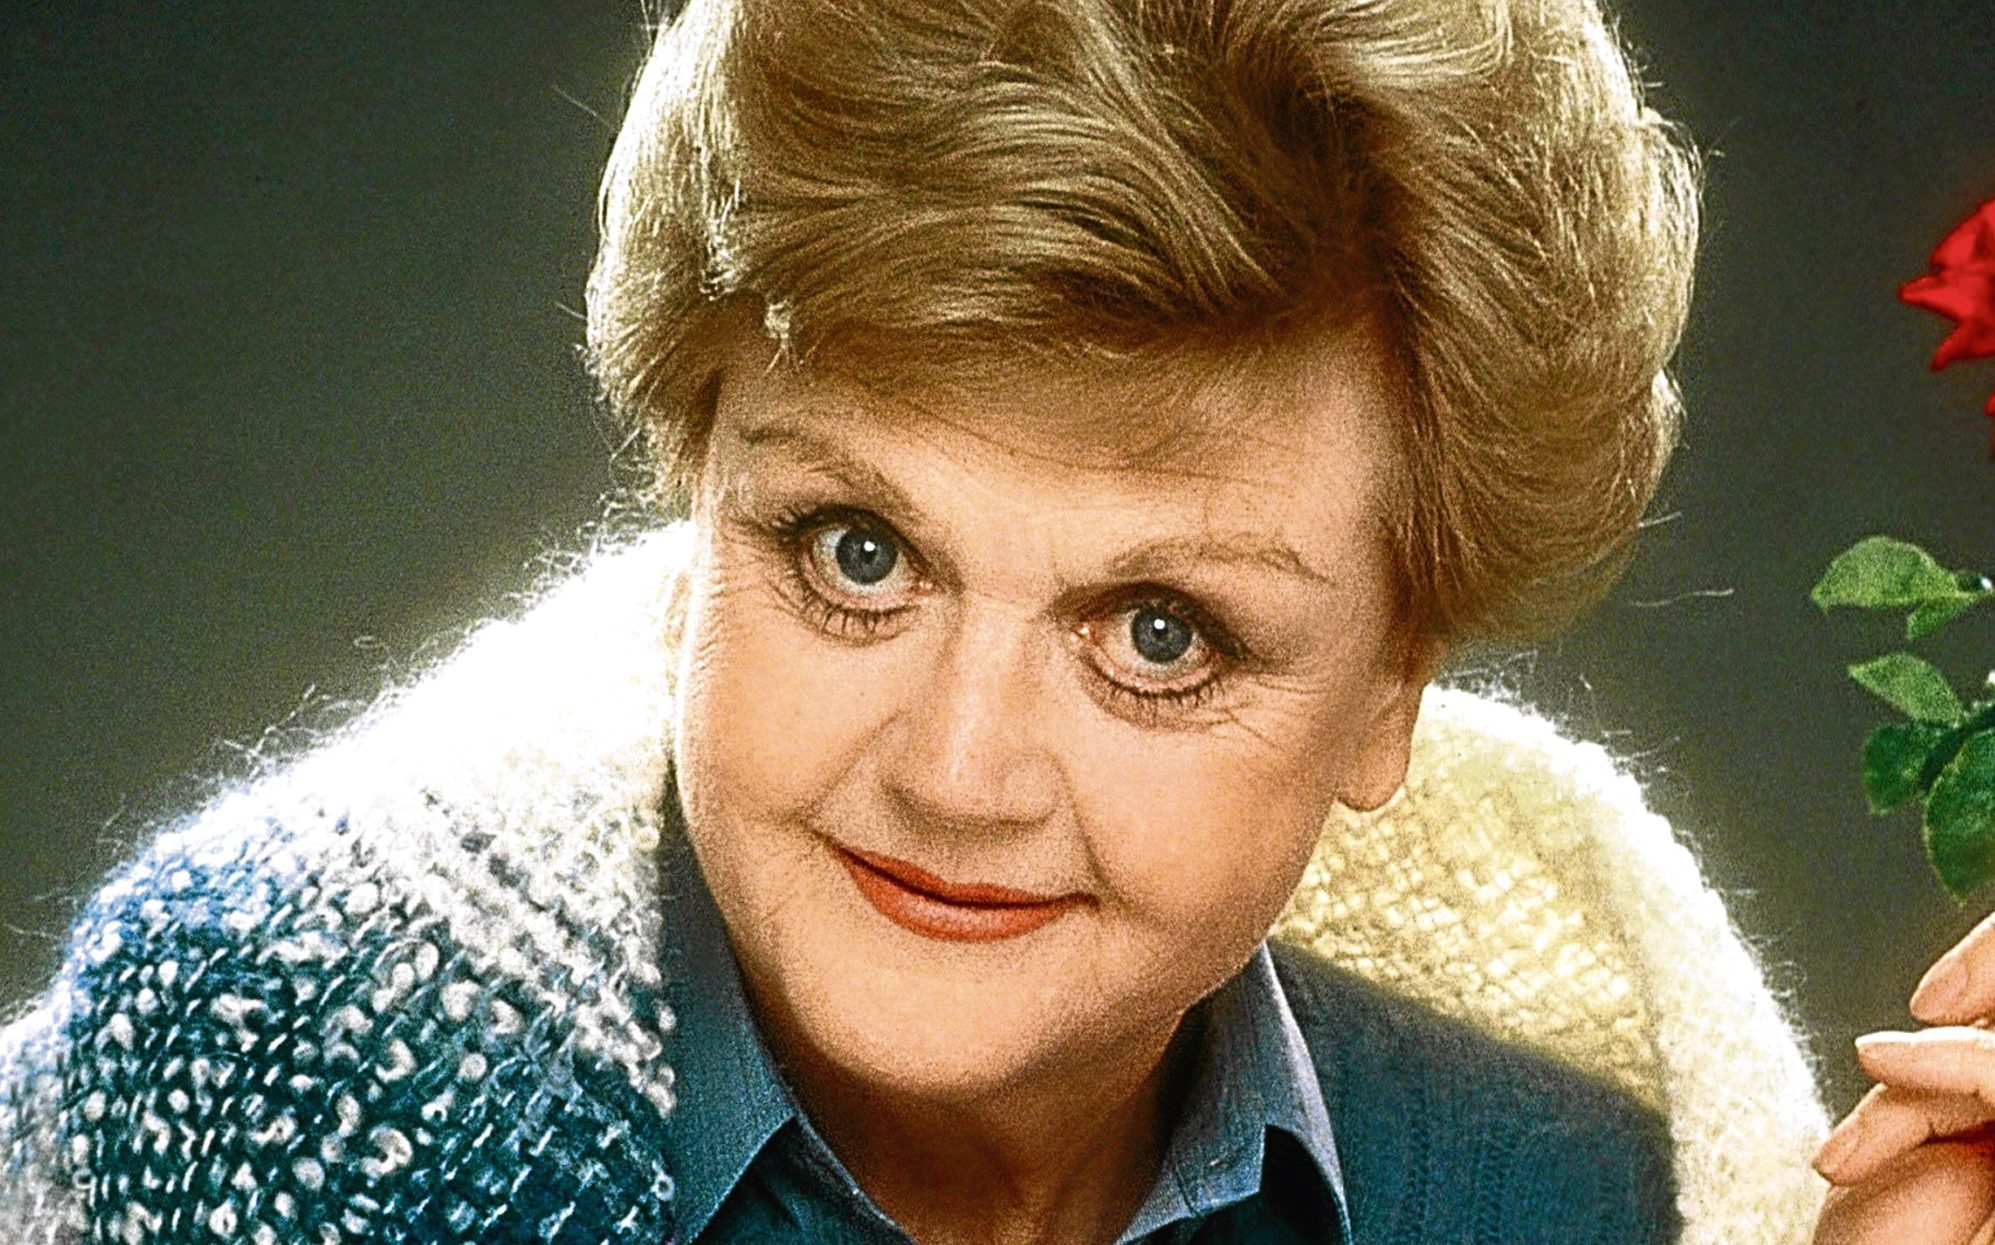 What S Happening In Entertainment Ringside Report Wishes Hollywood Legend Dame Angela Lansbury A Happy 94th Birthday Ringside Report